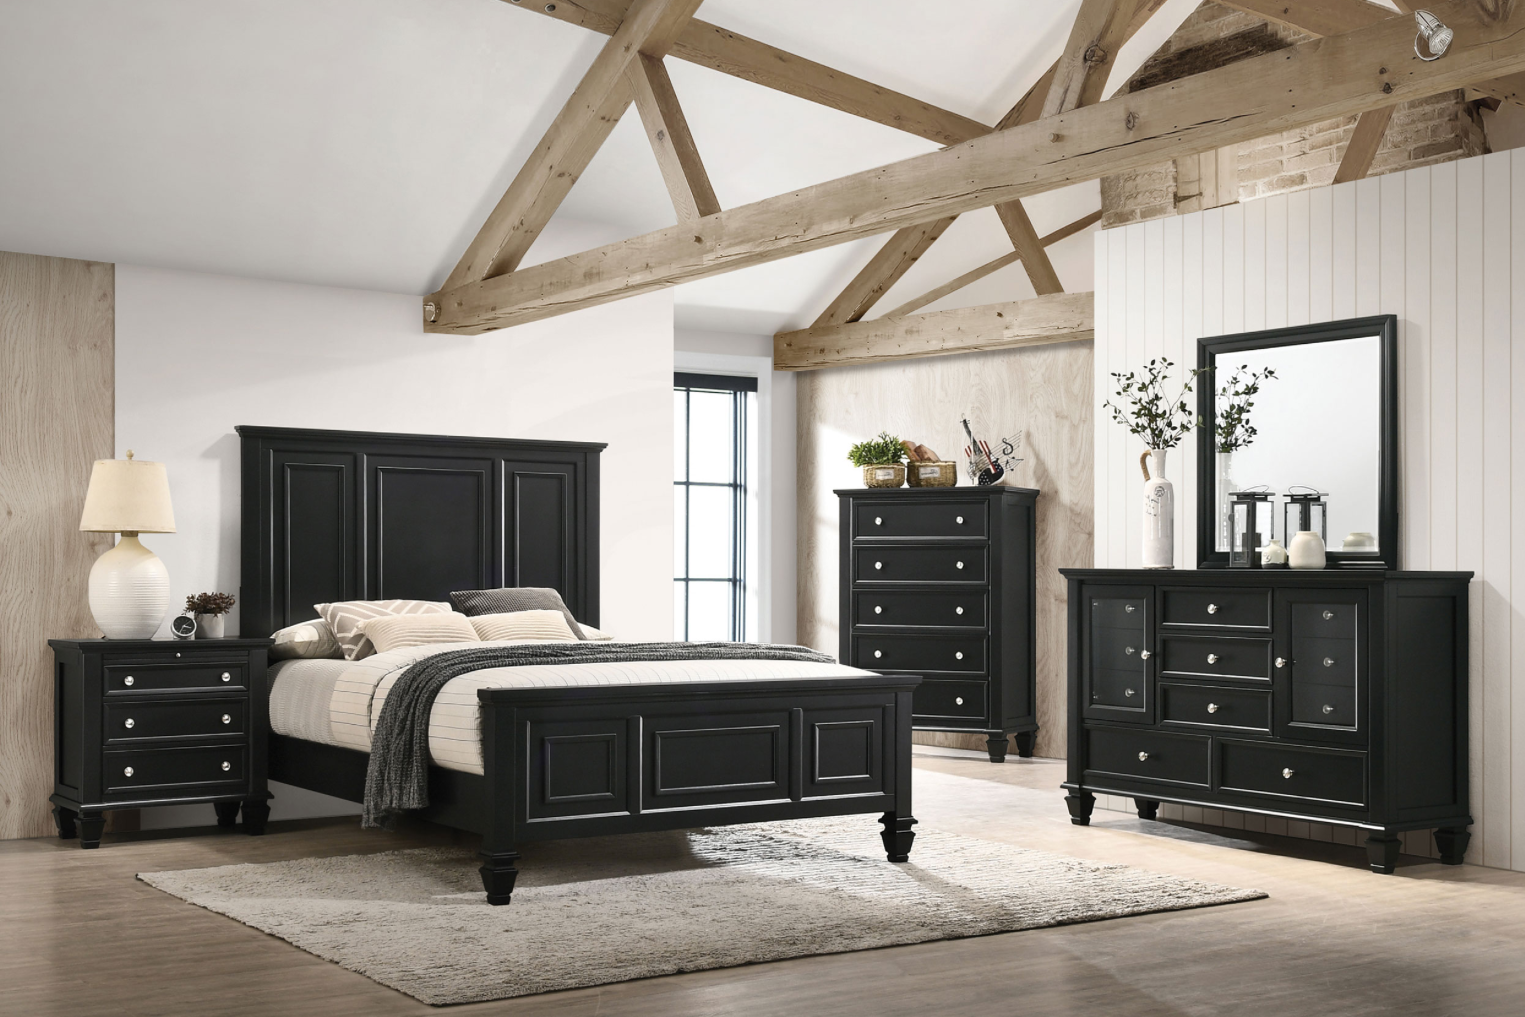 Sandy Beach II Black Cottage Style Queen Panel Bed